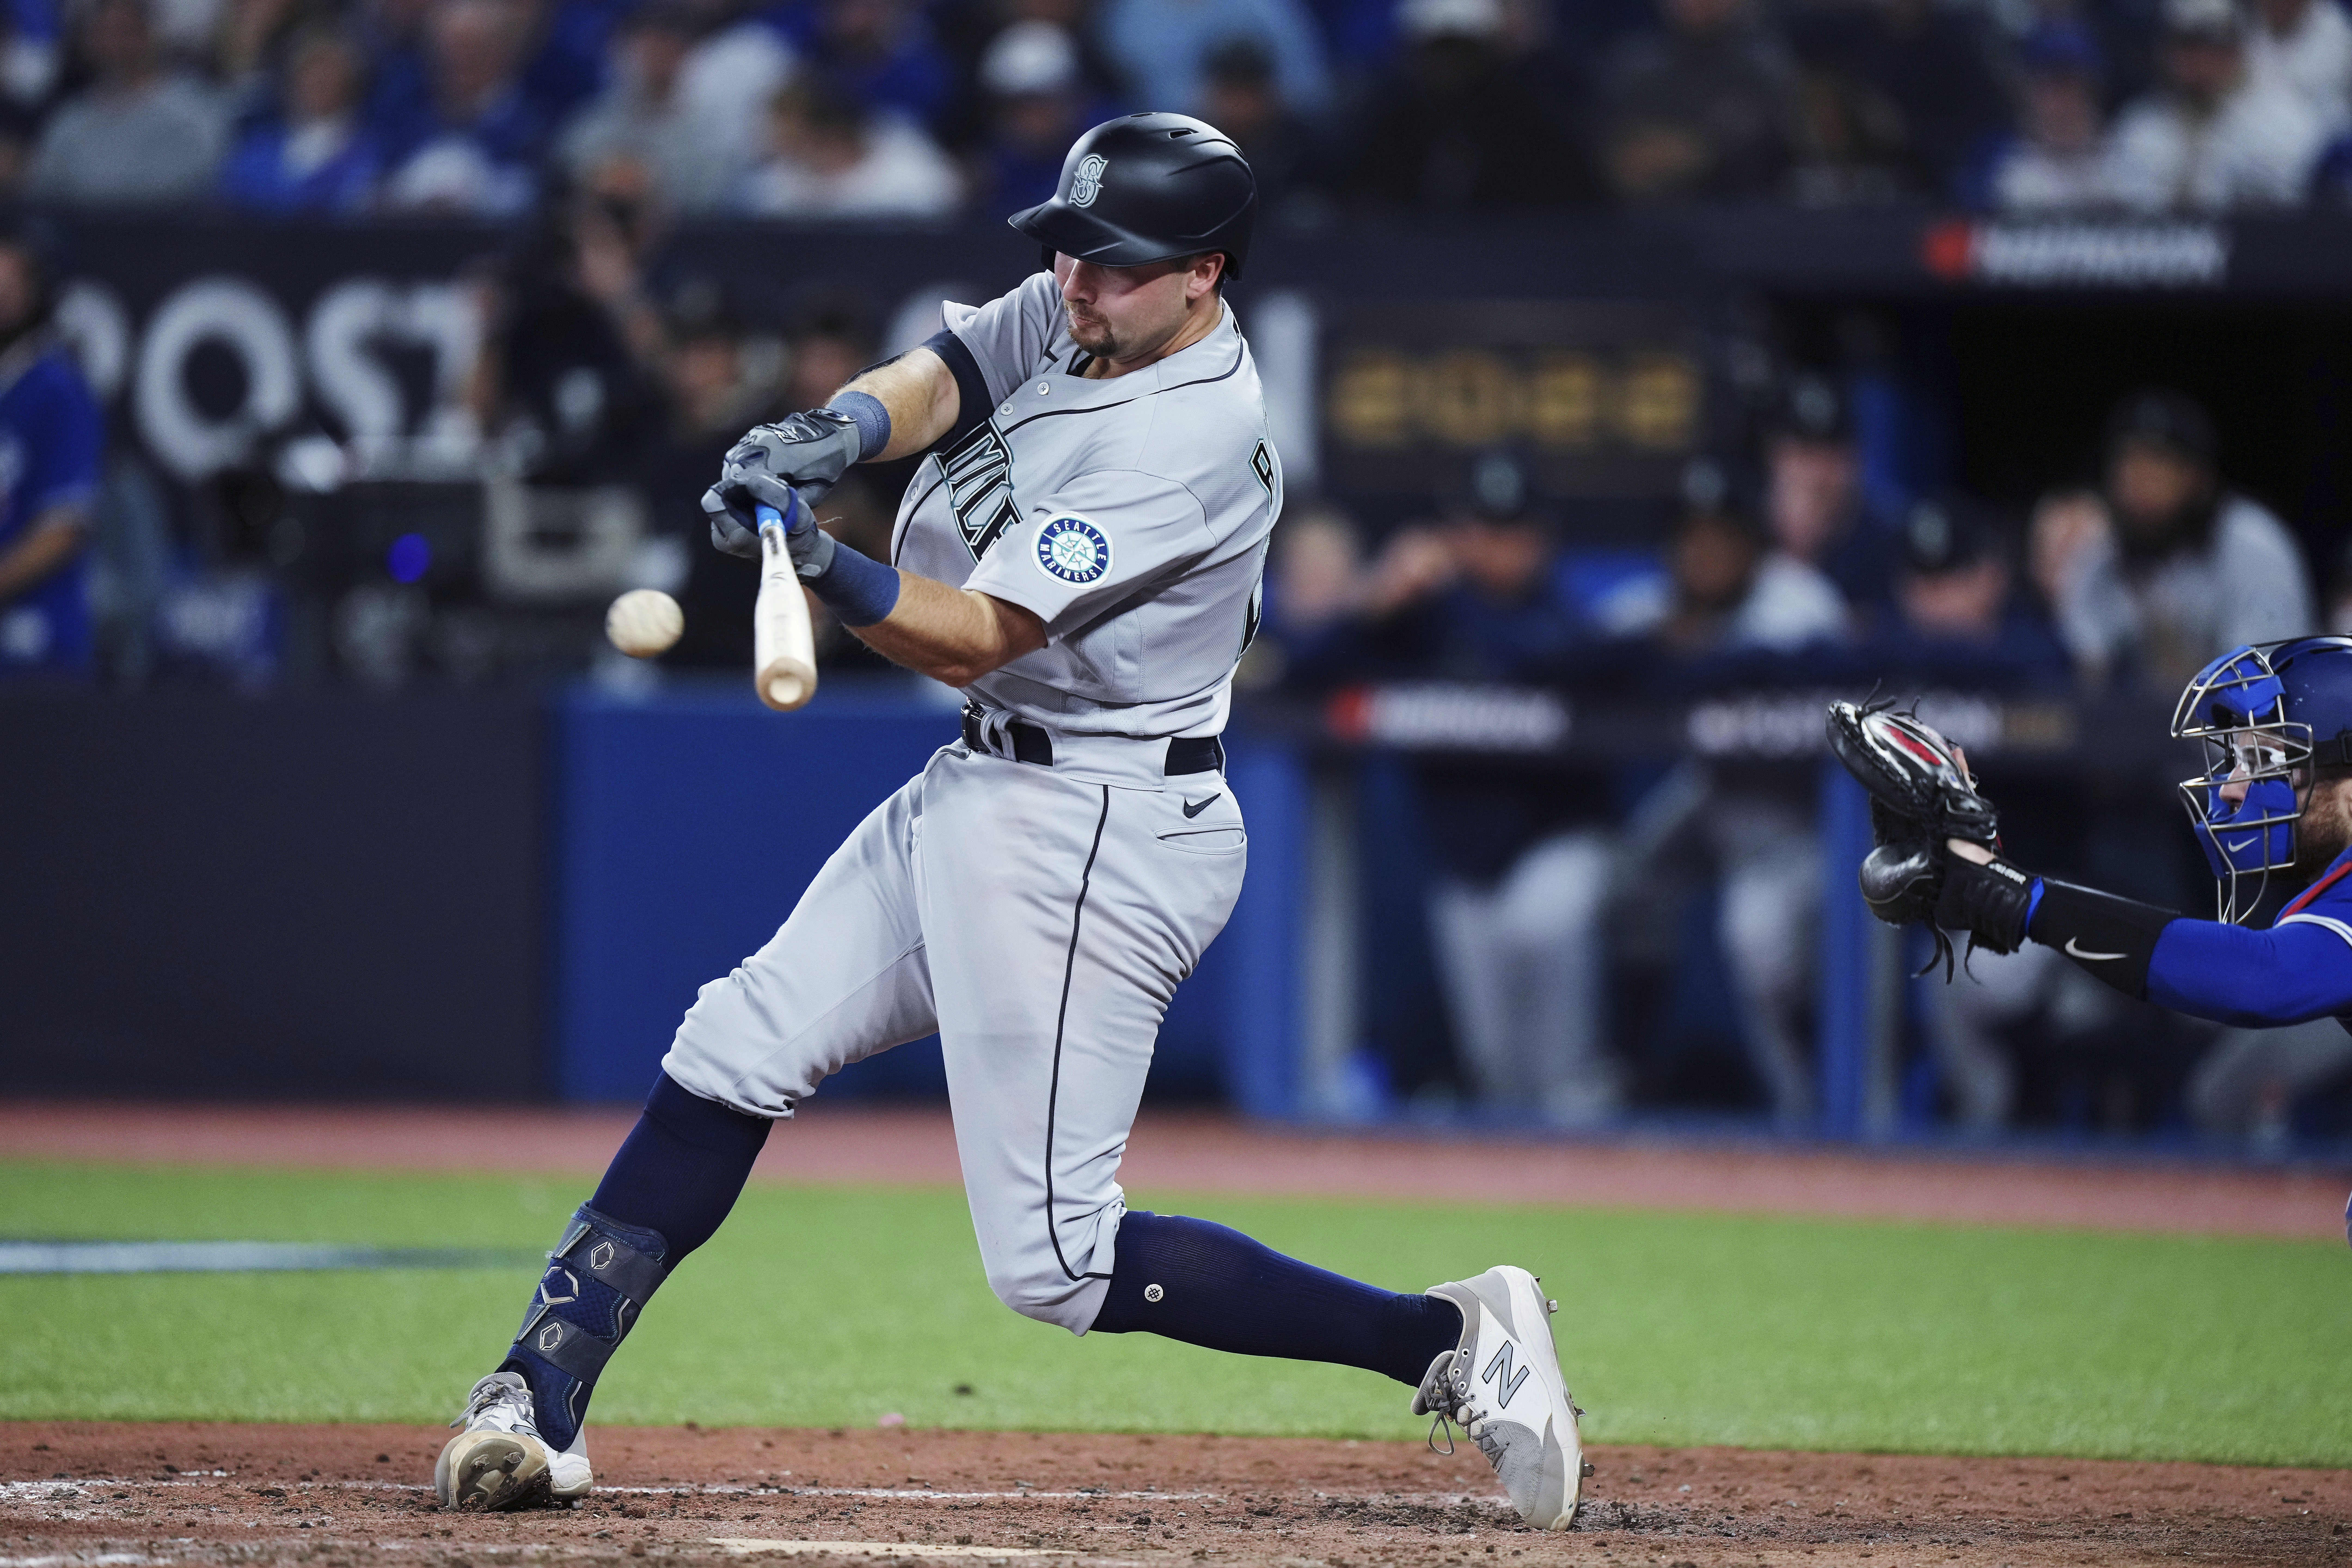 Boone muscles up  Seattle mariners baseball, Seattle sports